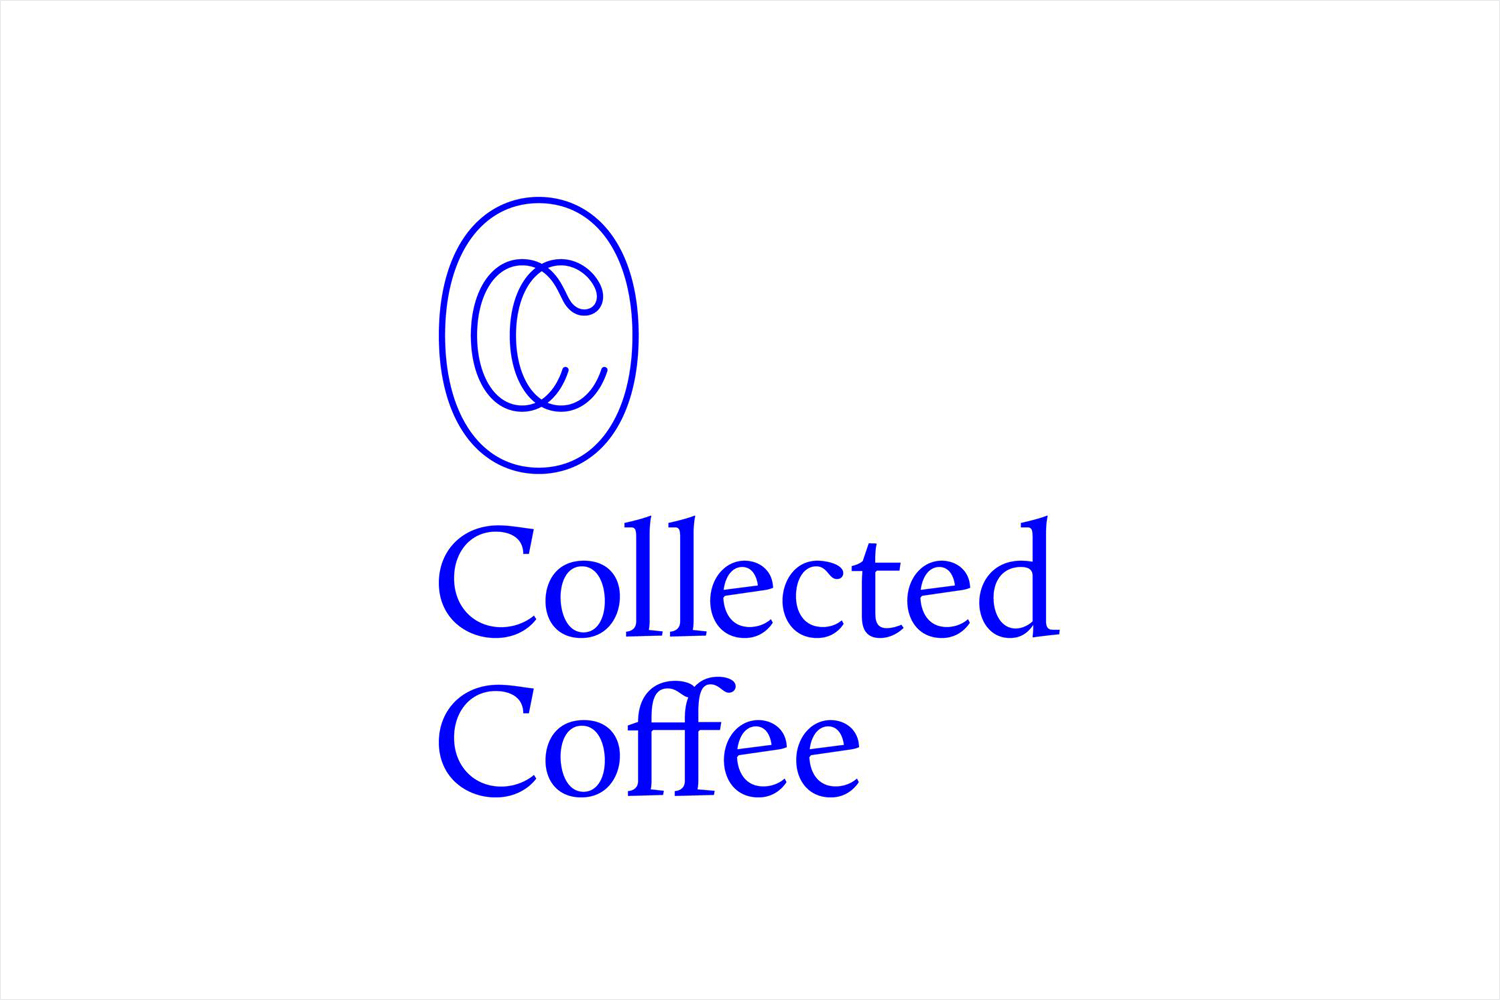 Monogram and logotype for New York coffee subscription service Collected Coffee by Fivethousand Fingers